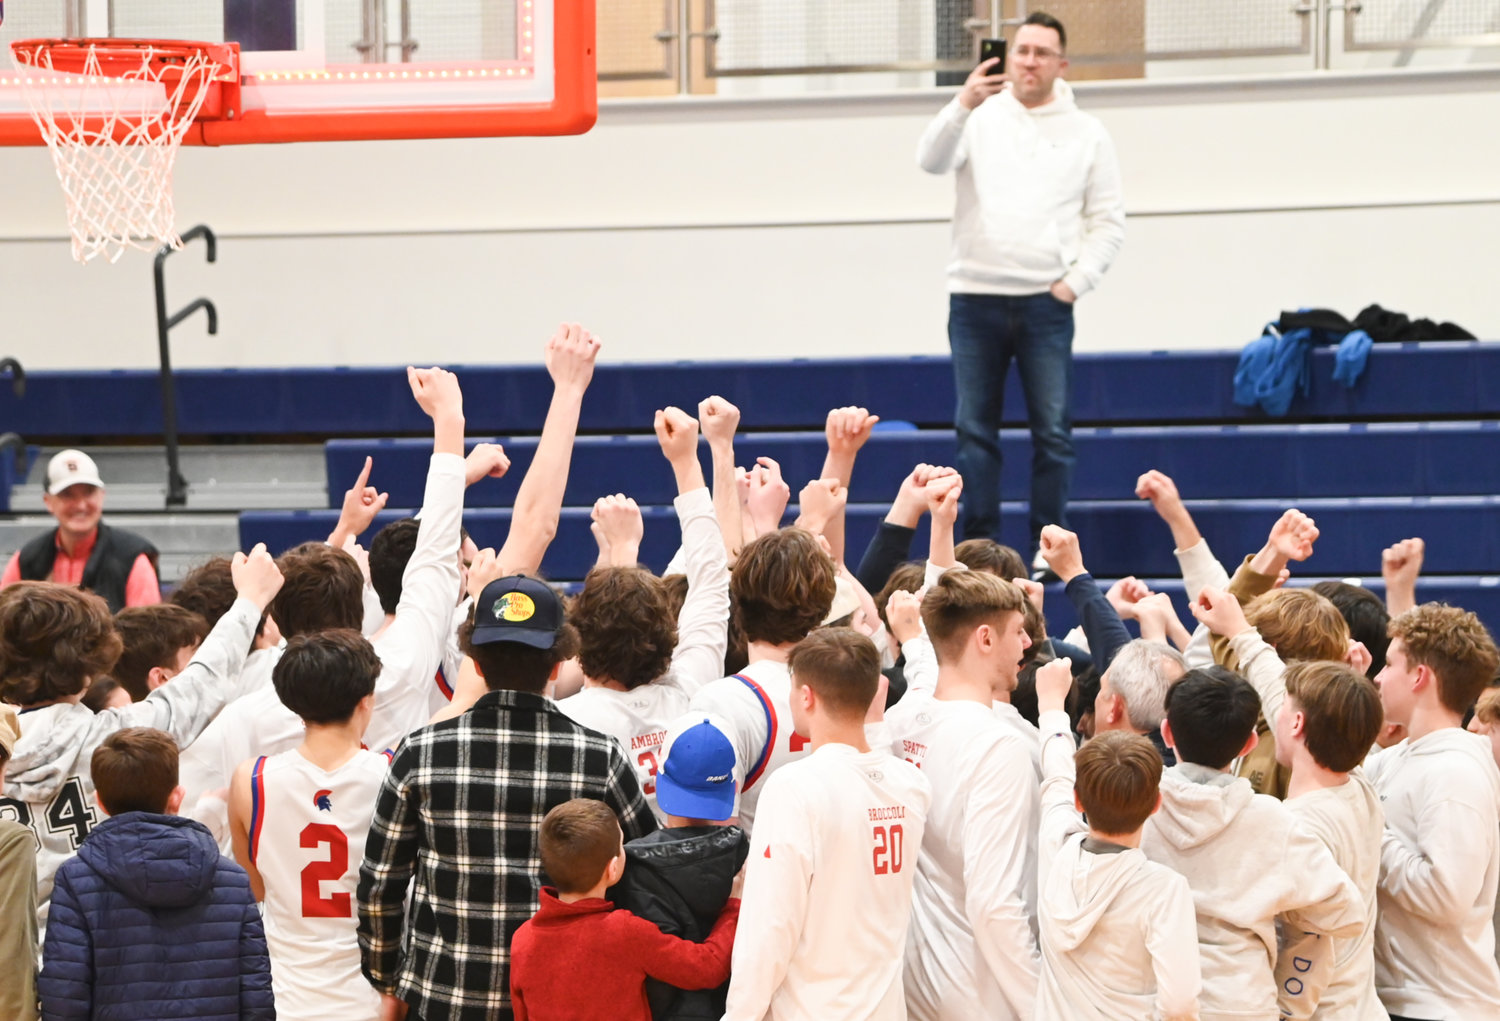 New Hartford players and fans celebrate following the team's Class A regional win on Wednesday at Liverpool High School. Fans from New Hartford wore white to show support during the game.